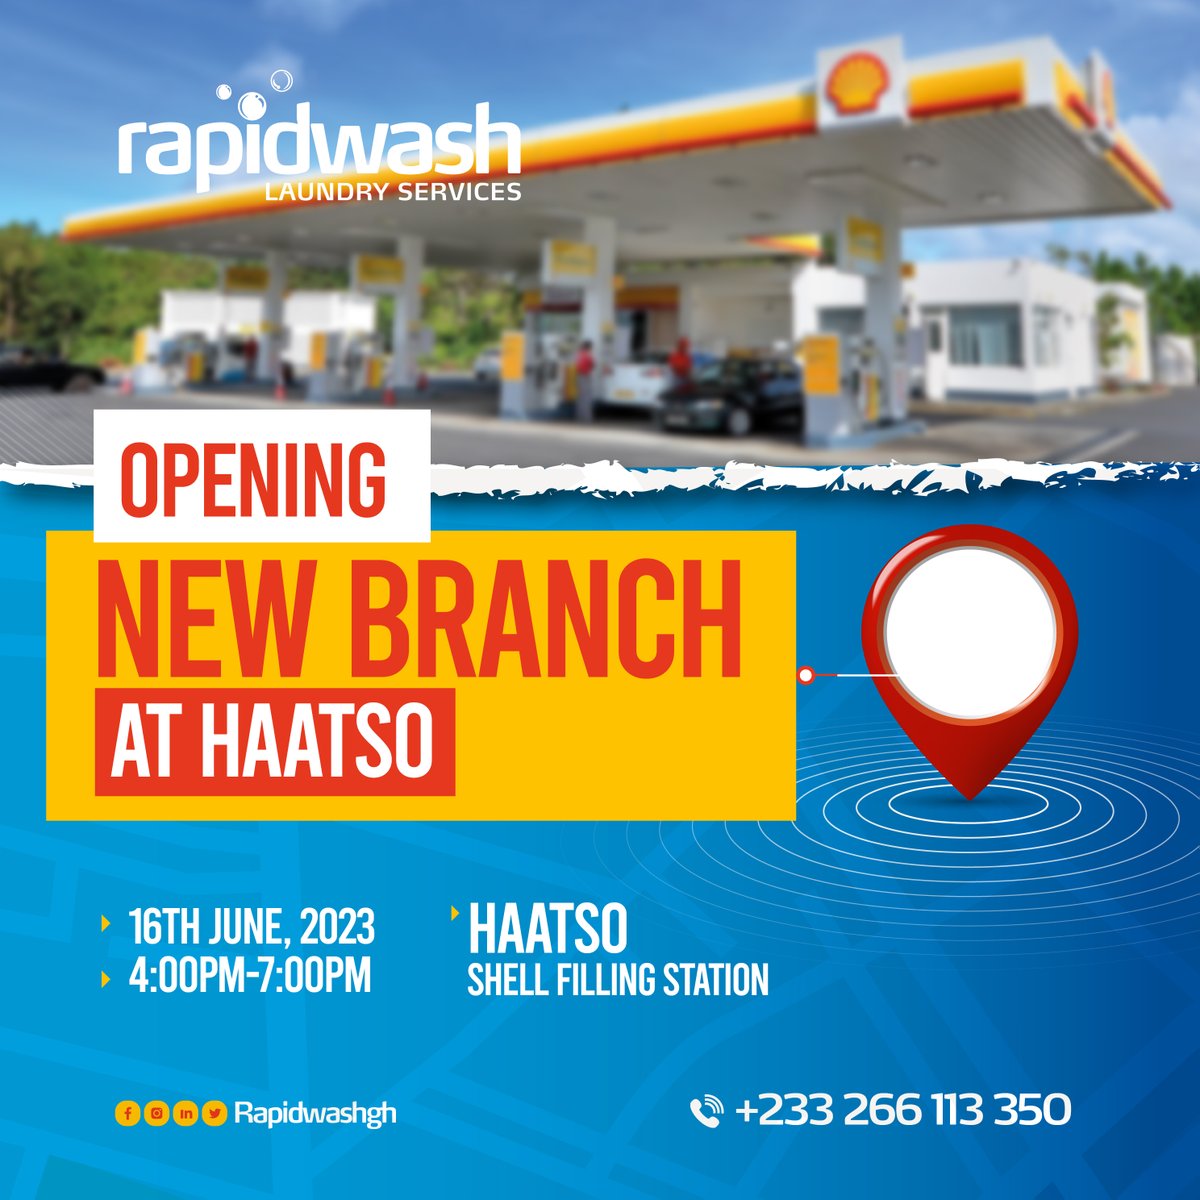 Haatso are you reaaadddyyyy?????
You called, here's us answering!!!!!!

Meet us at the Shell Filling Station, adjacent Legon Botanical Gardens this Fridaaaay🔥🔥

#grandopening #value #haatso #shellfillingstation #Rapidwash #onabudget #ffordable #terrifictuesday